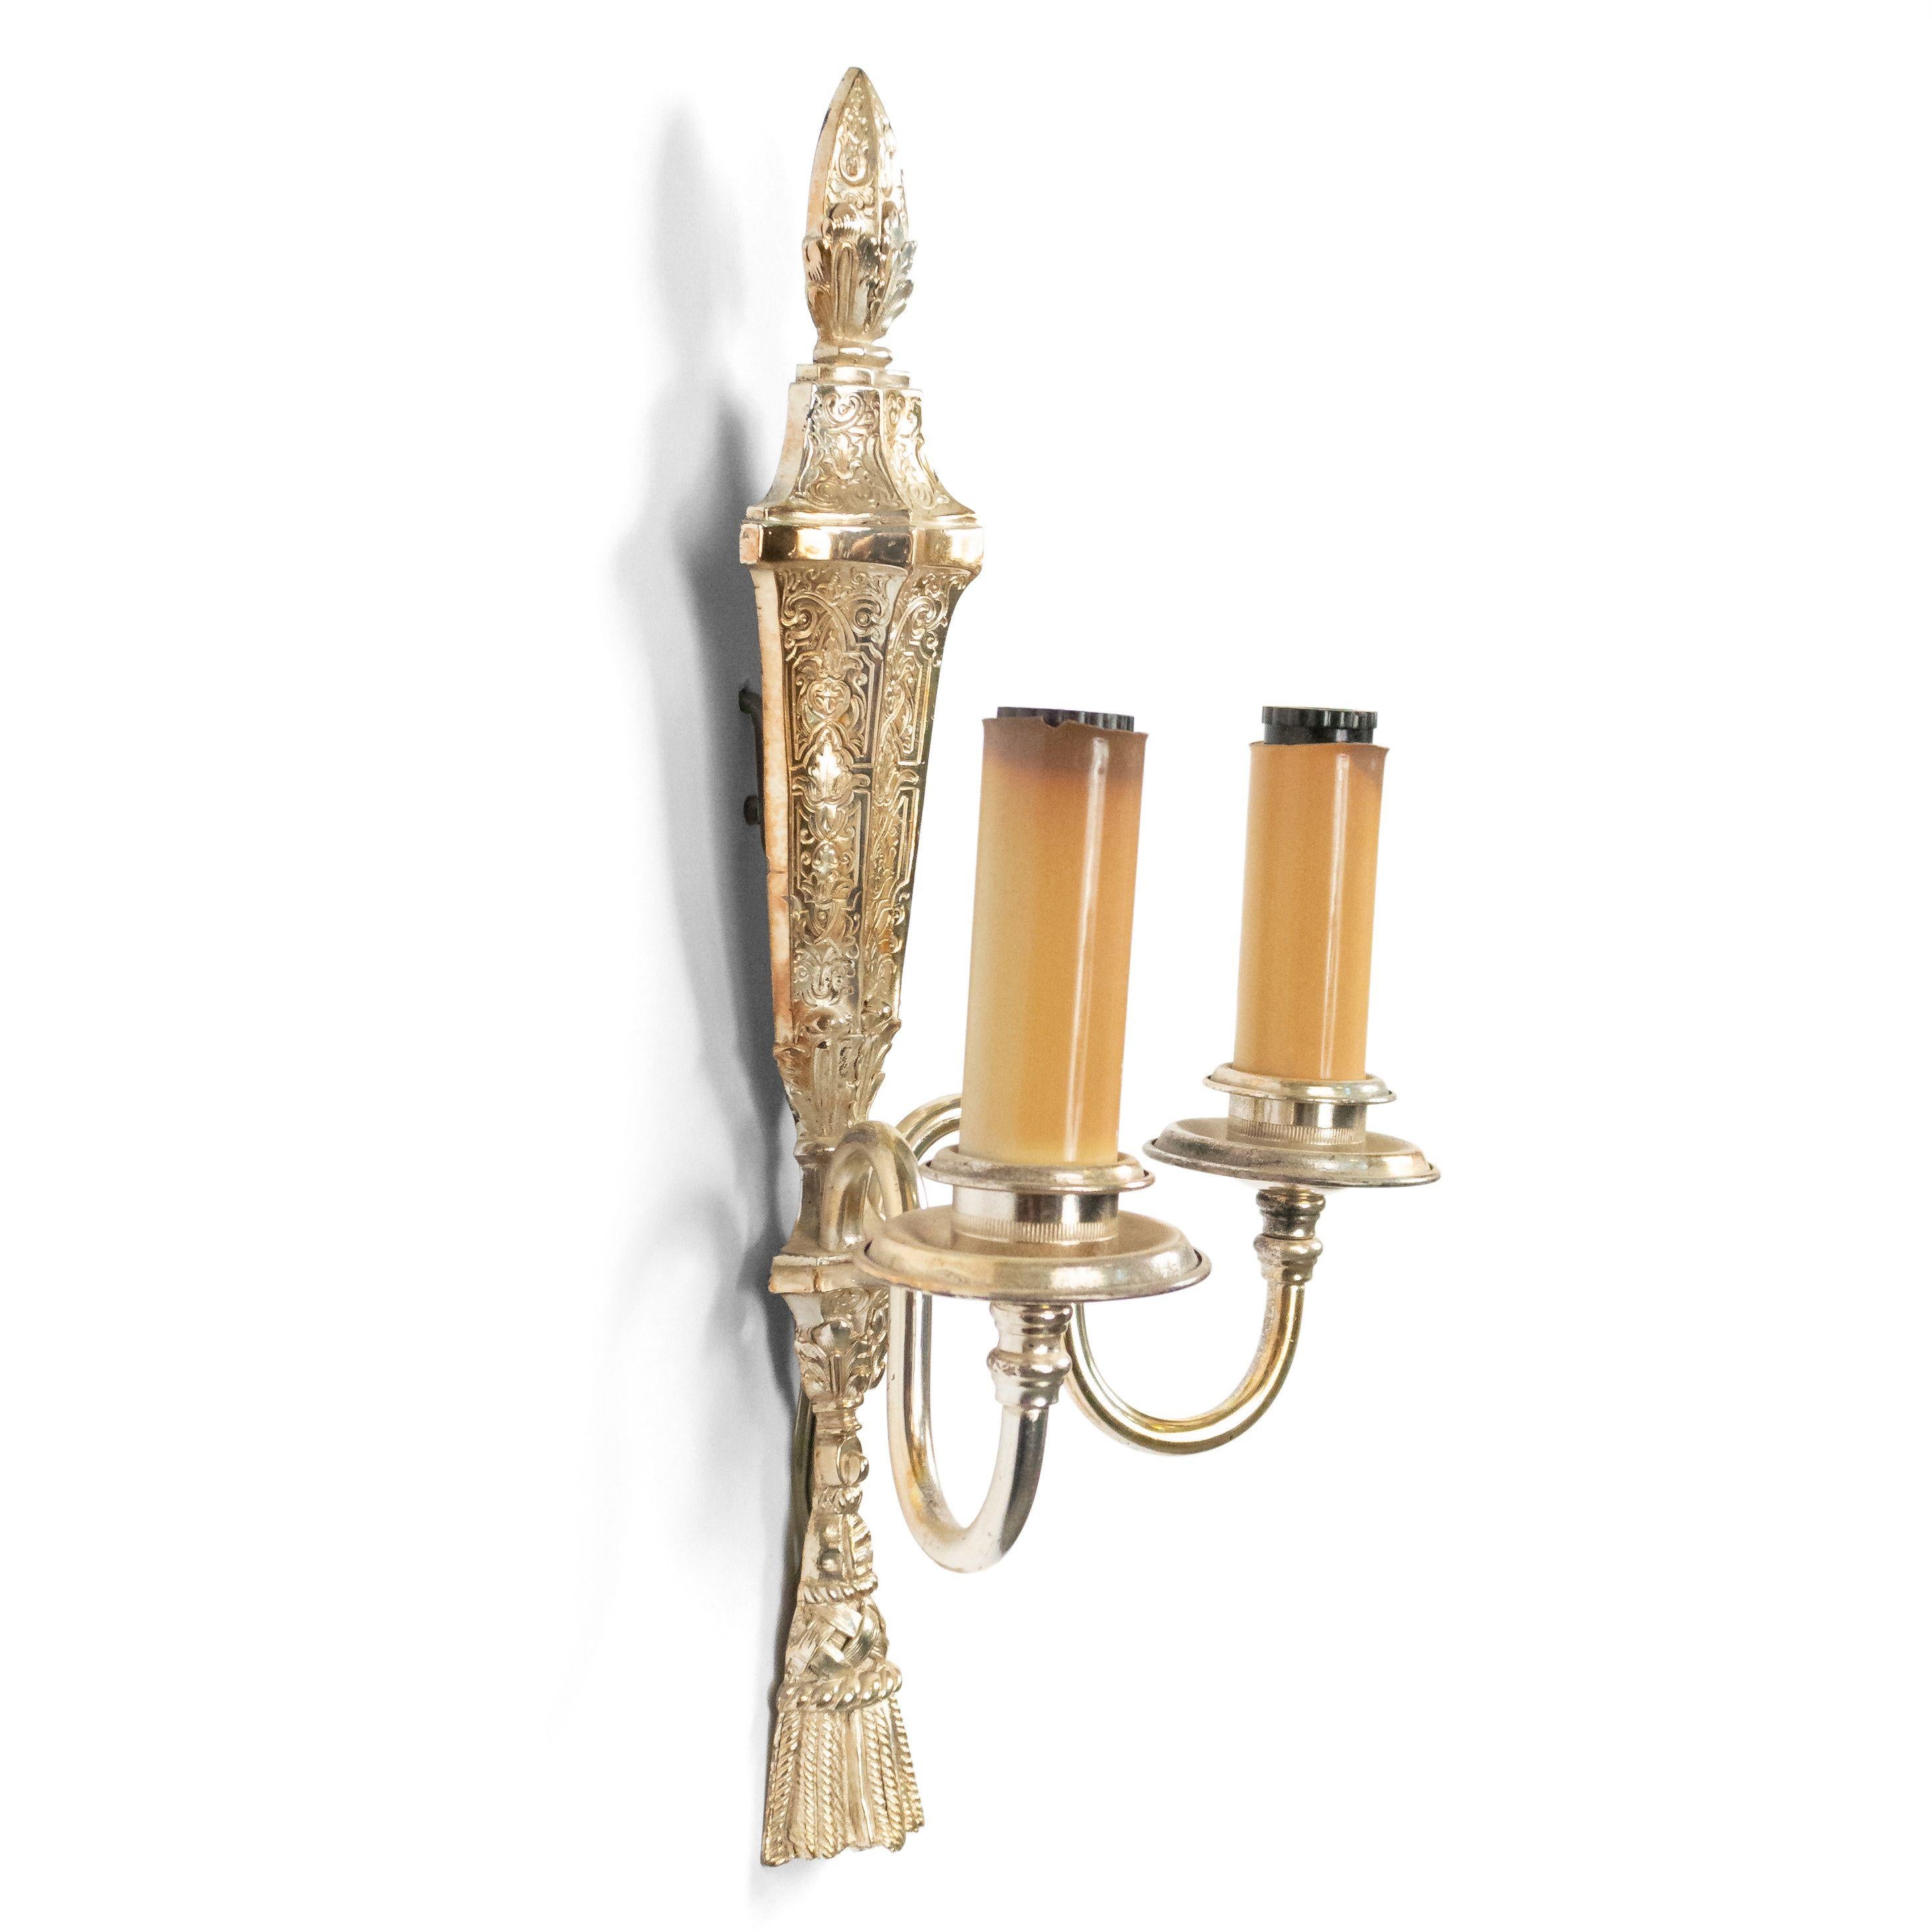 Pair of English Georgian style (19th-20th century) silver plate etched 2-arm wall sconces with tassel bottom and finial top. (Caldwell).